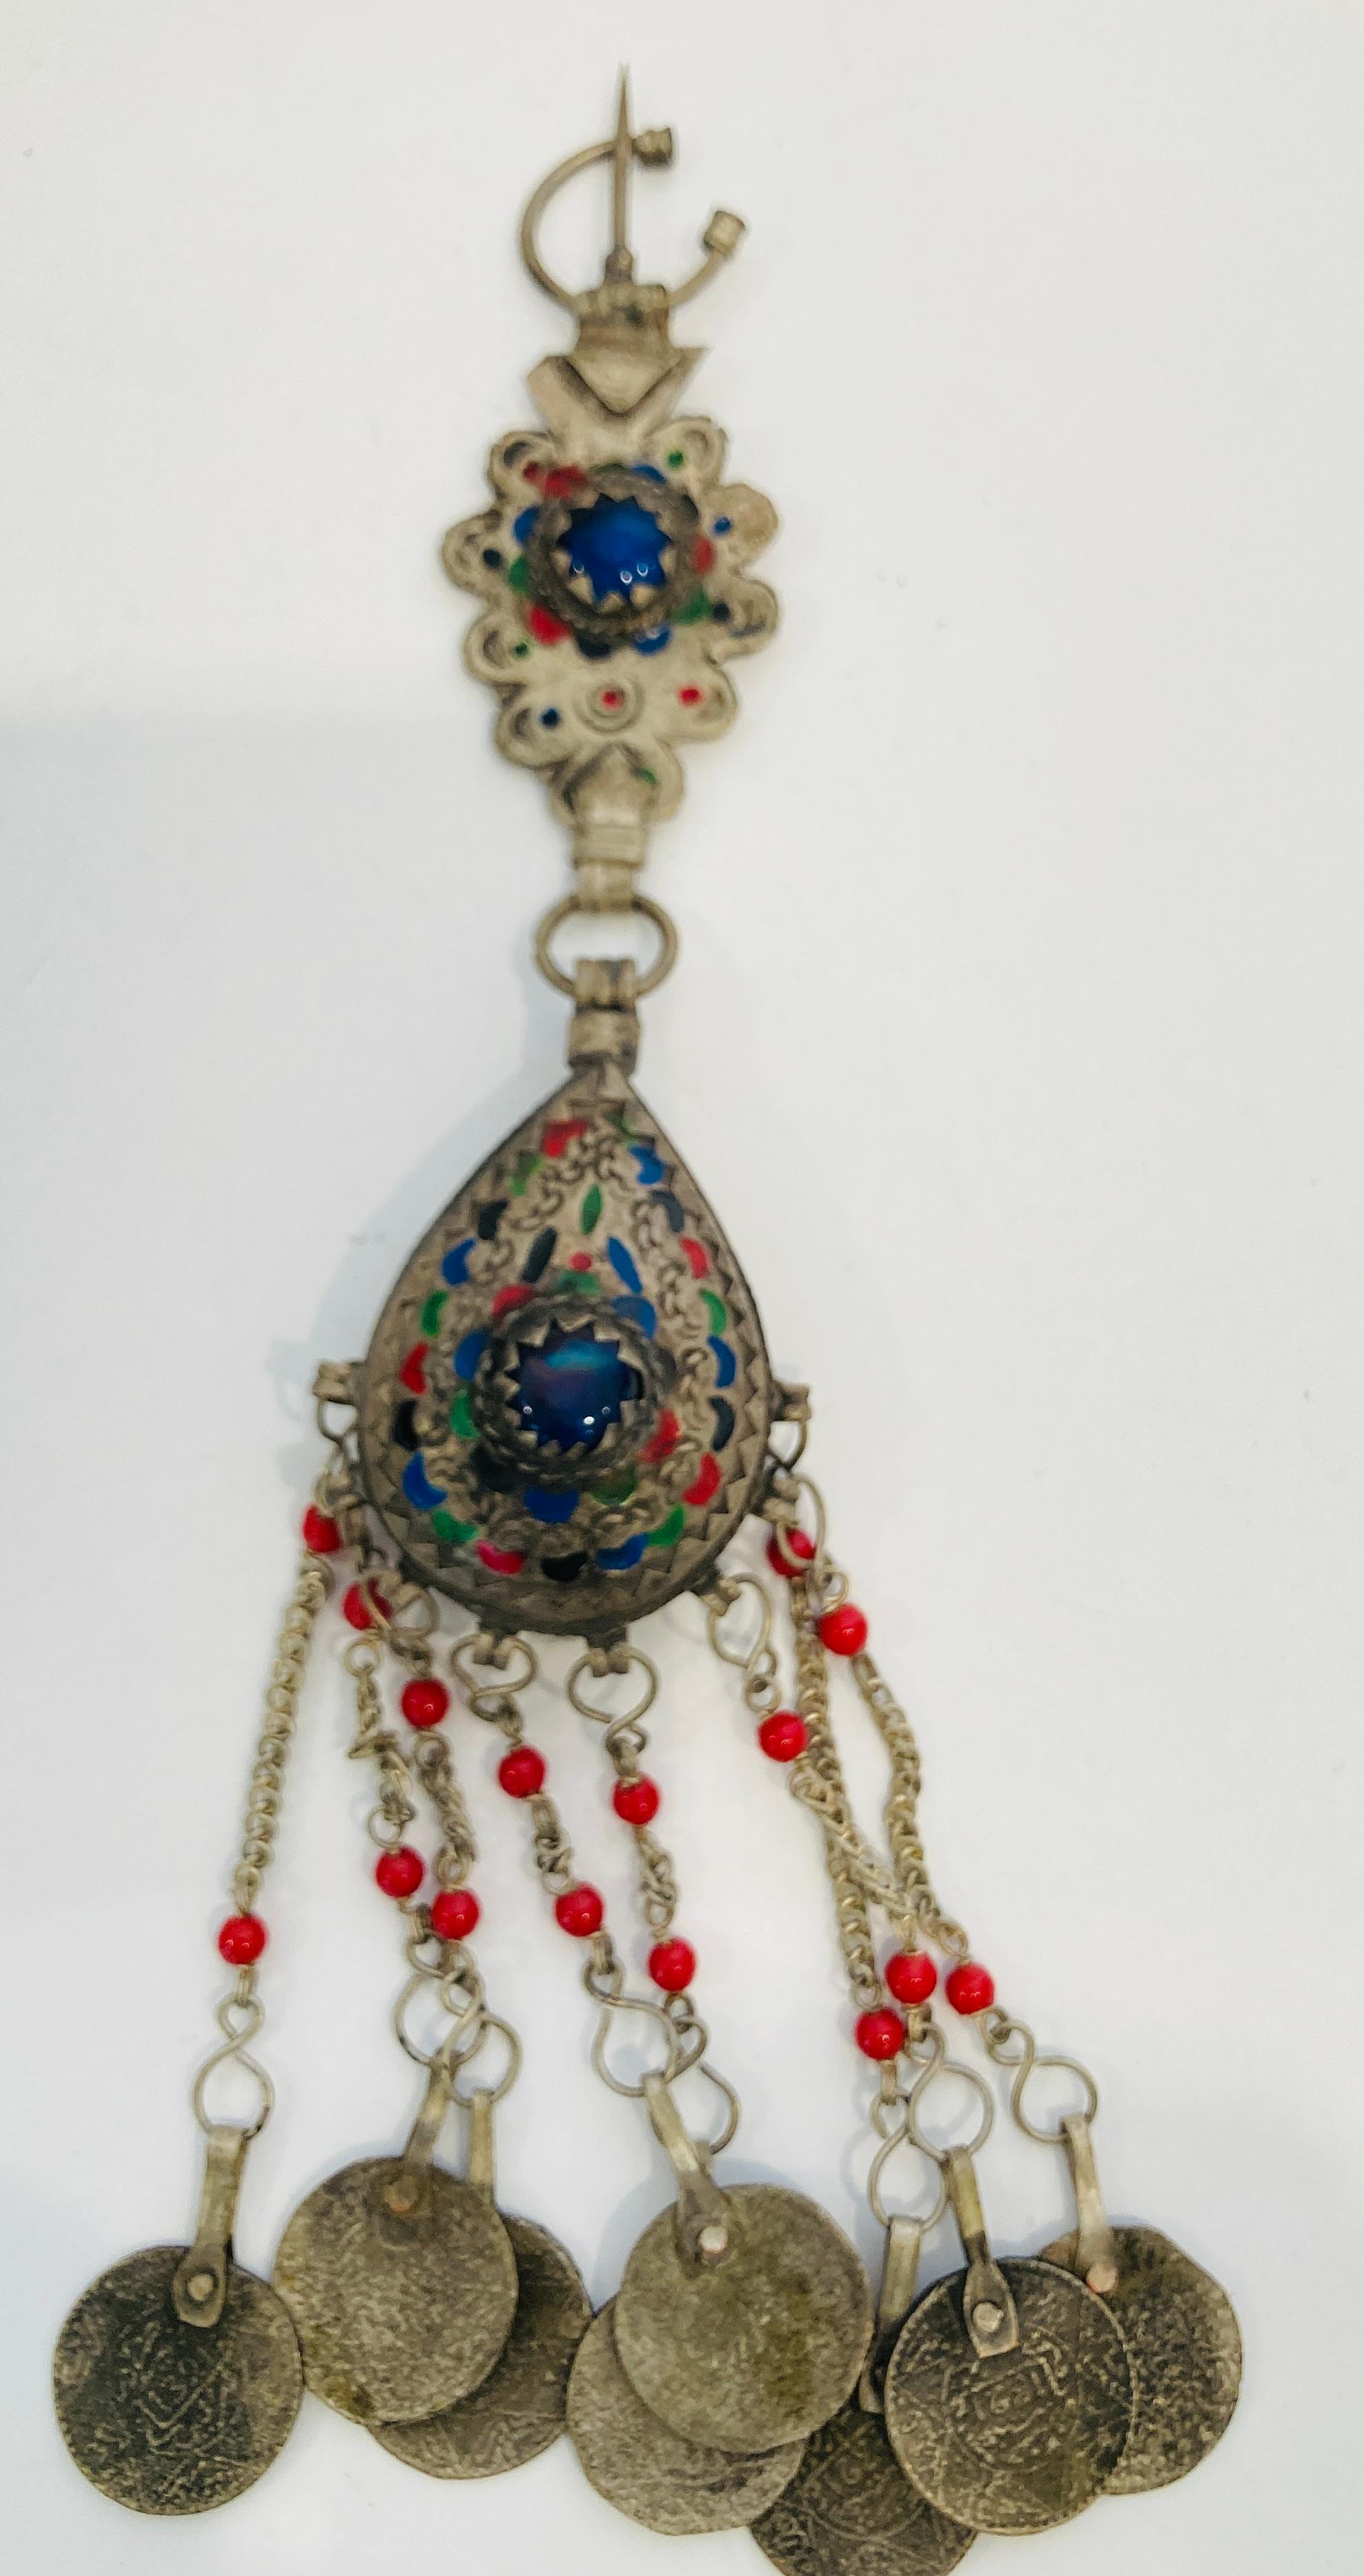 Beautiful vintage Moroccan ethnic fibula.
A fibula was used to close a woman's veil in the Middle East and North Africa.
Handcrafted by Berber and Nomadic Women from the High Atlas of Morocco.
Total length: 10 in. tassels length: 3.5 in.
Made of